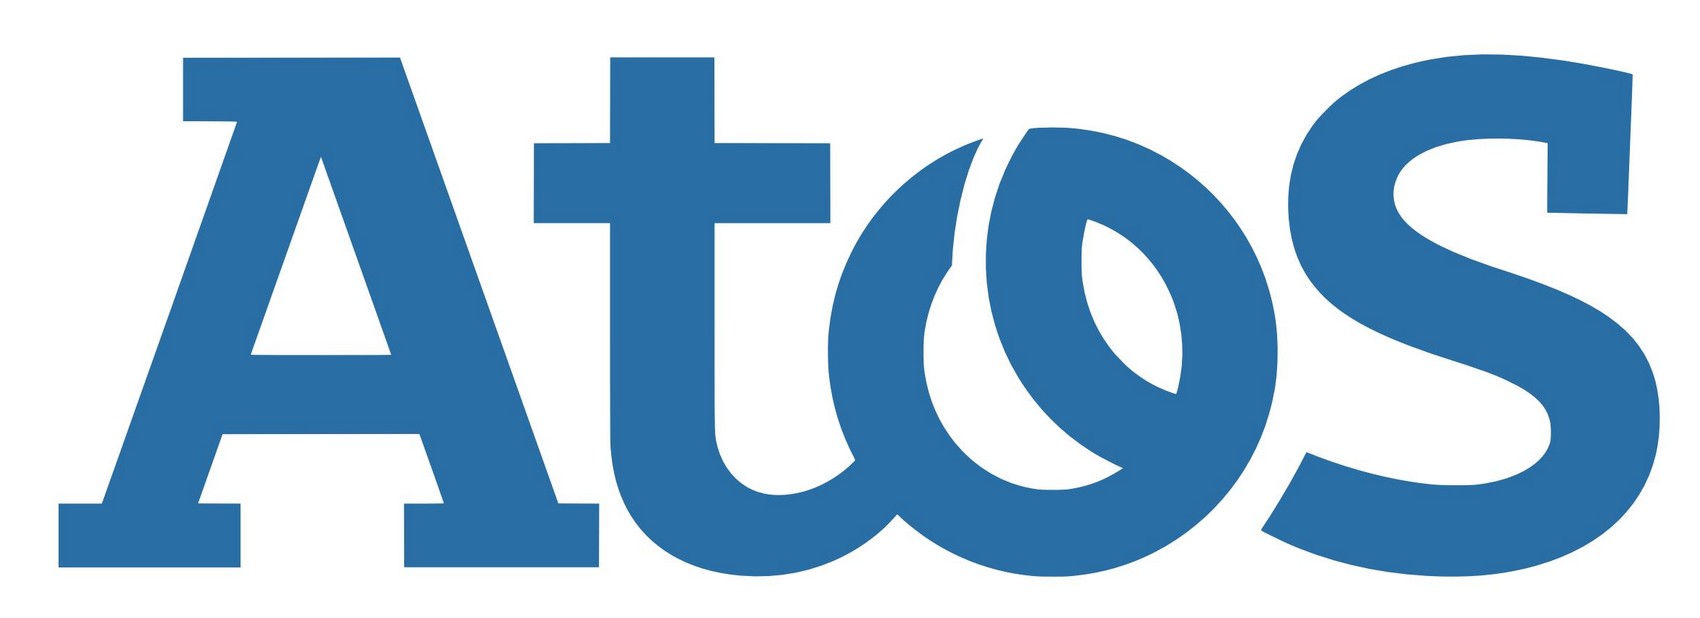 Atos is an international information technology services company withannual revenues of EUR 8.5 billion and 74,000 employees in 48 countries., Atos Vector PNG - Free PNG